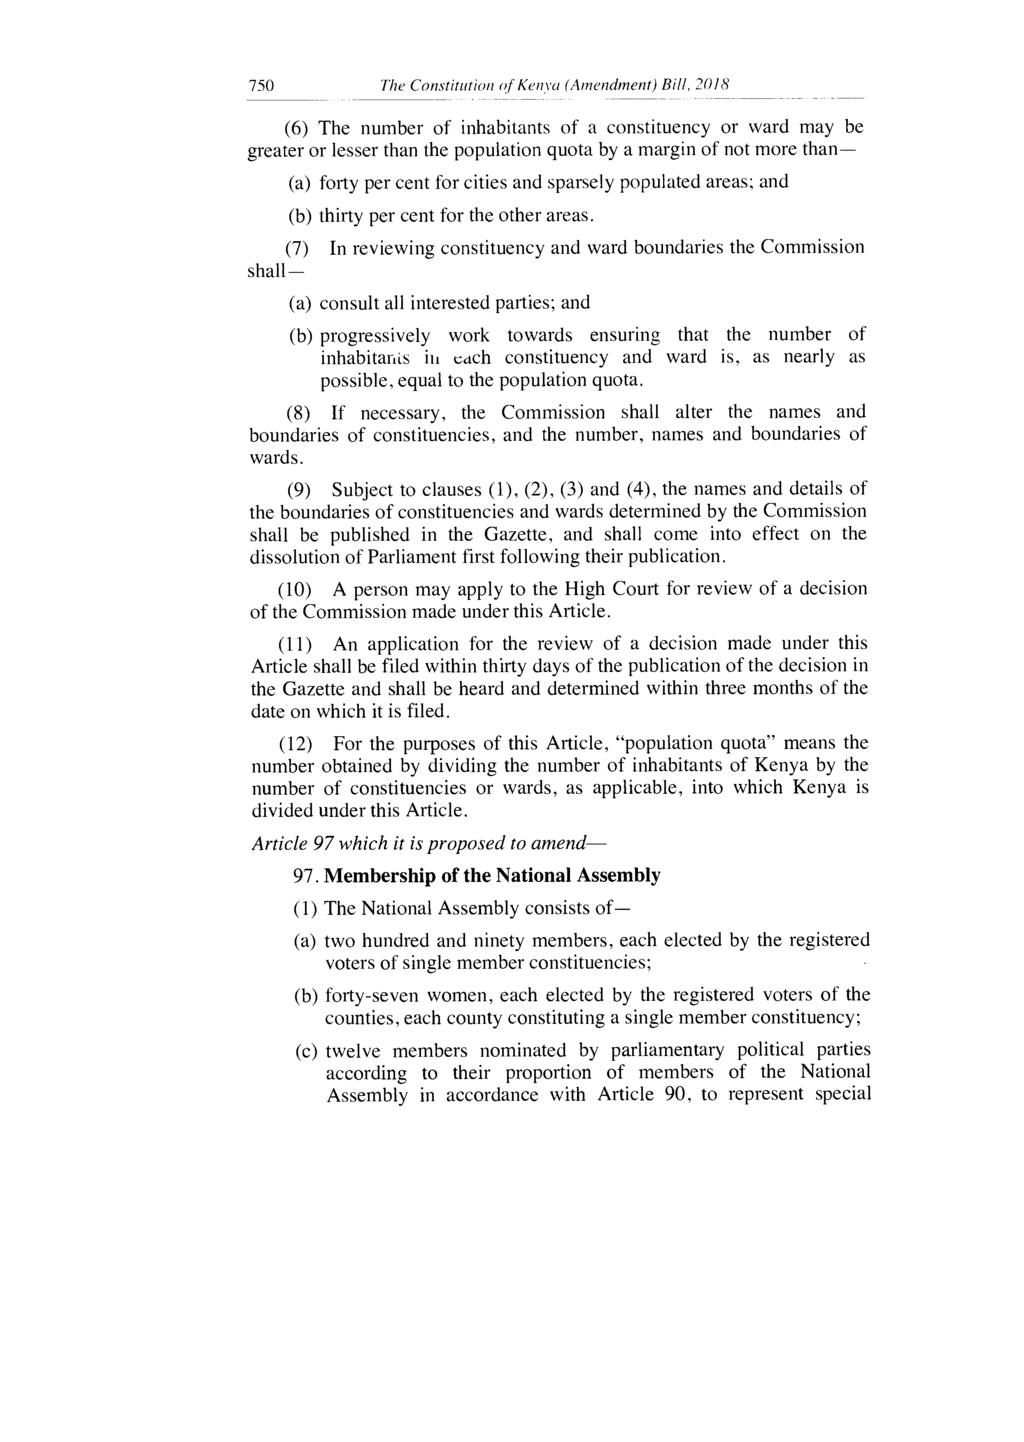 750 The Constitution of Kenya (Amendment) Bill, 2018 (6) The number of inhabitants of a constituency or ward may be greater or lesser than the population quota by a margin of not more than (a) forty